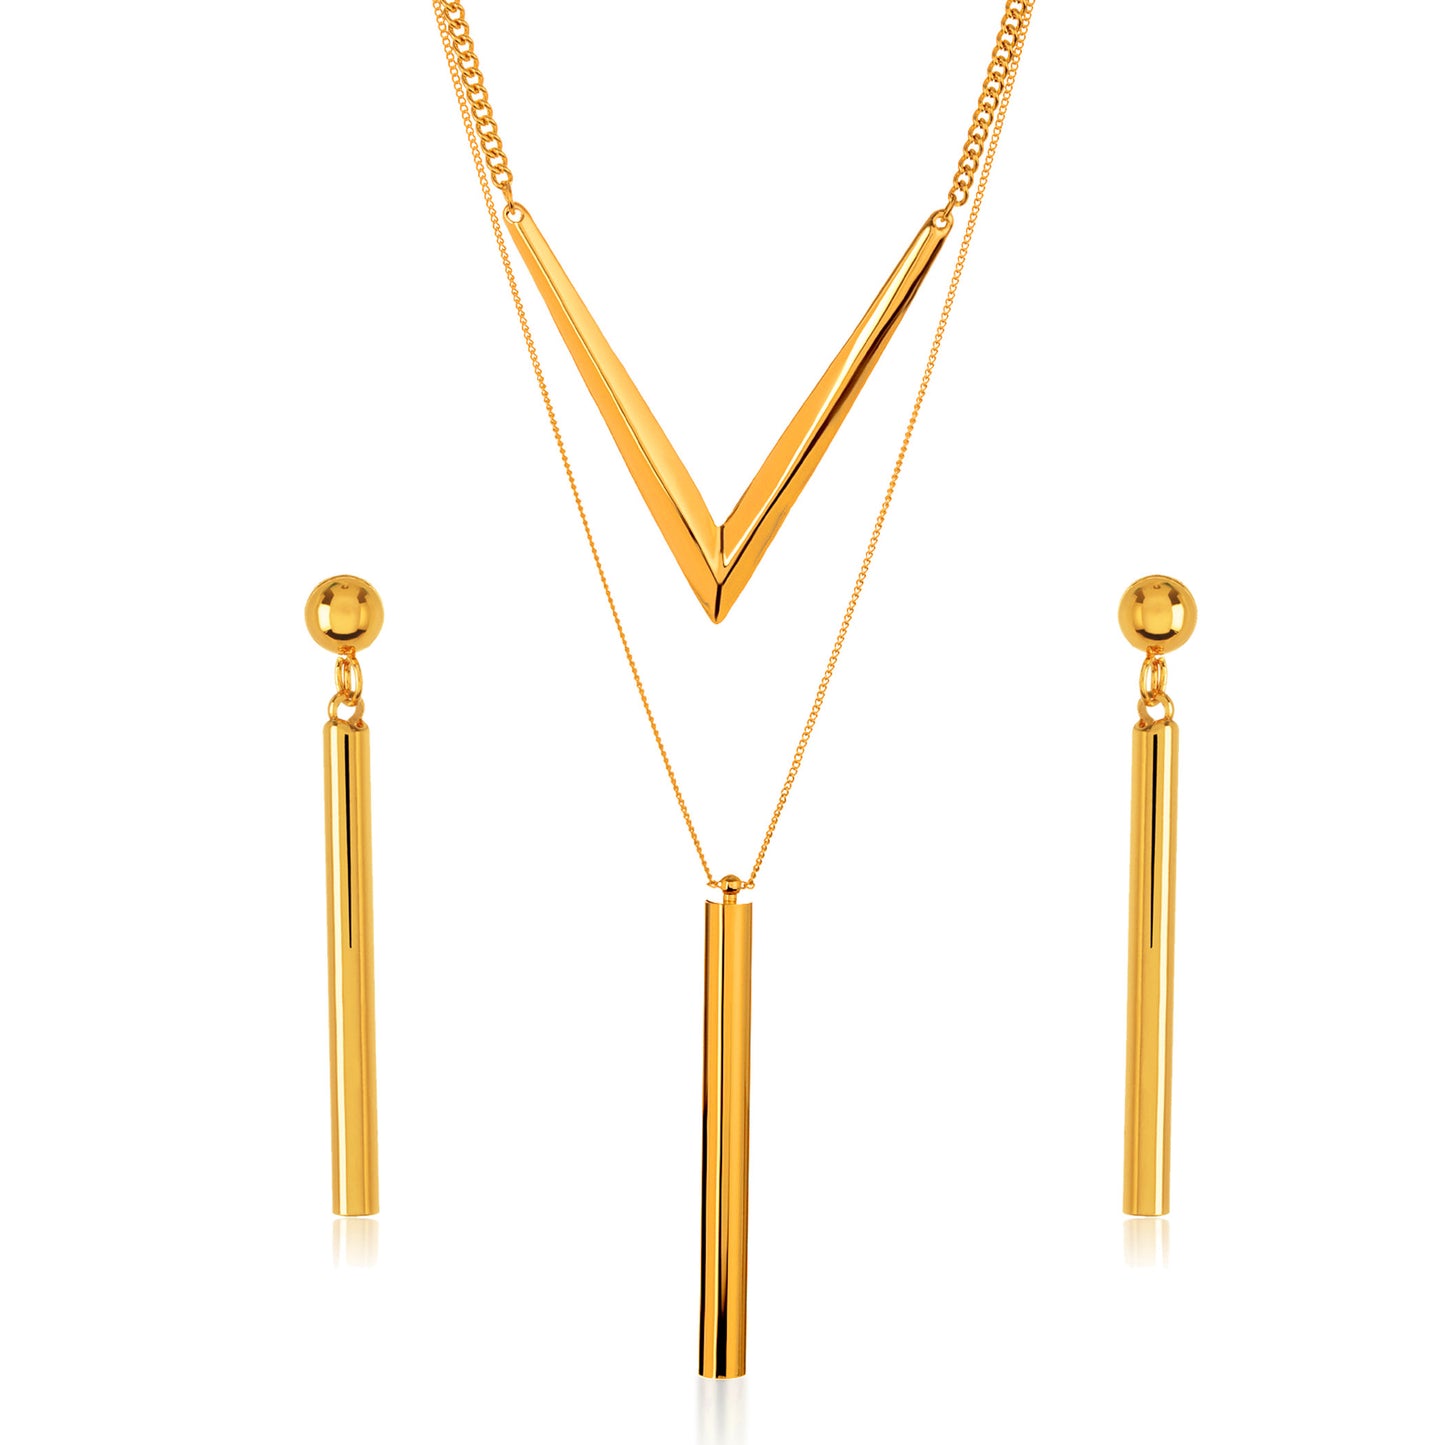 ELYA Women's Gold Tone Cylinder Bar Charm Necklace and Earrings Jewelry Set